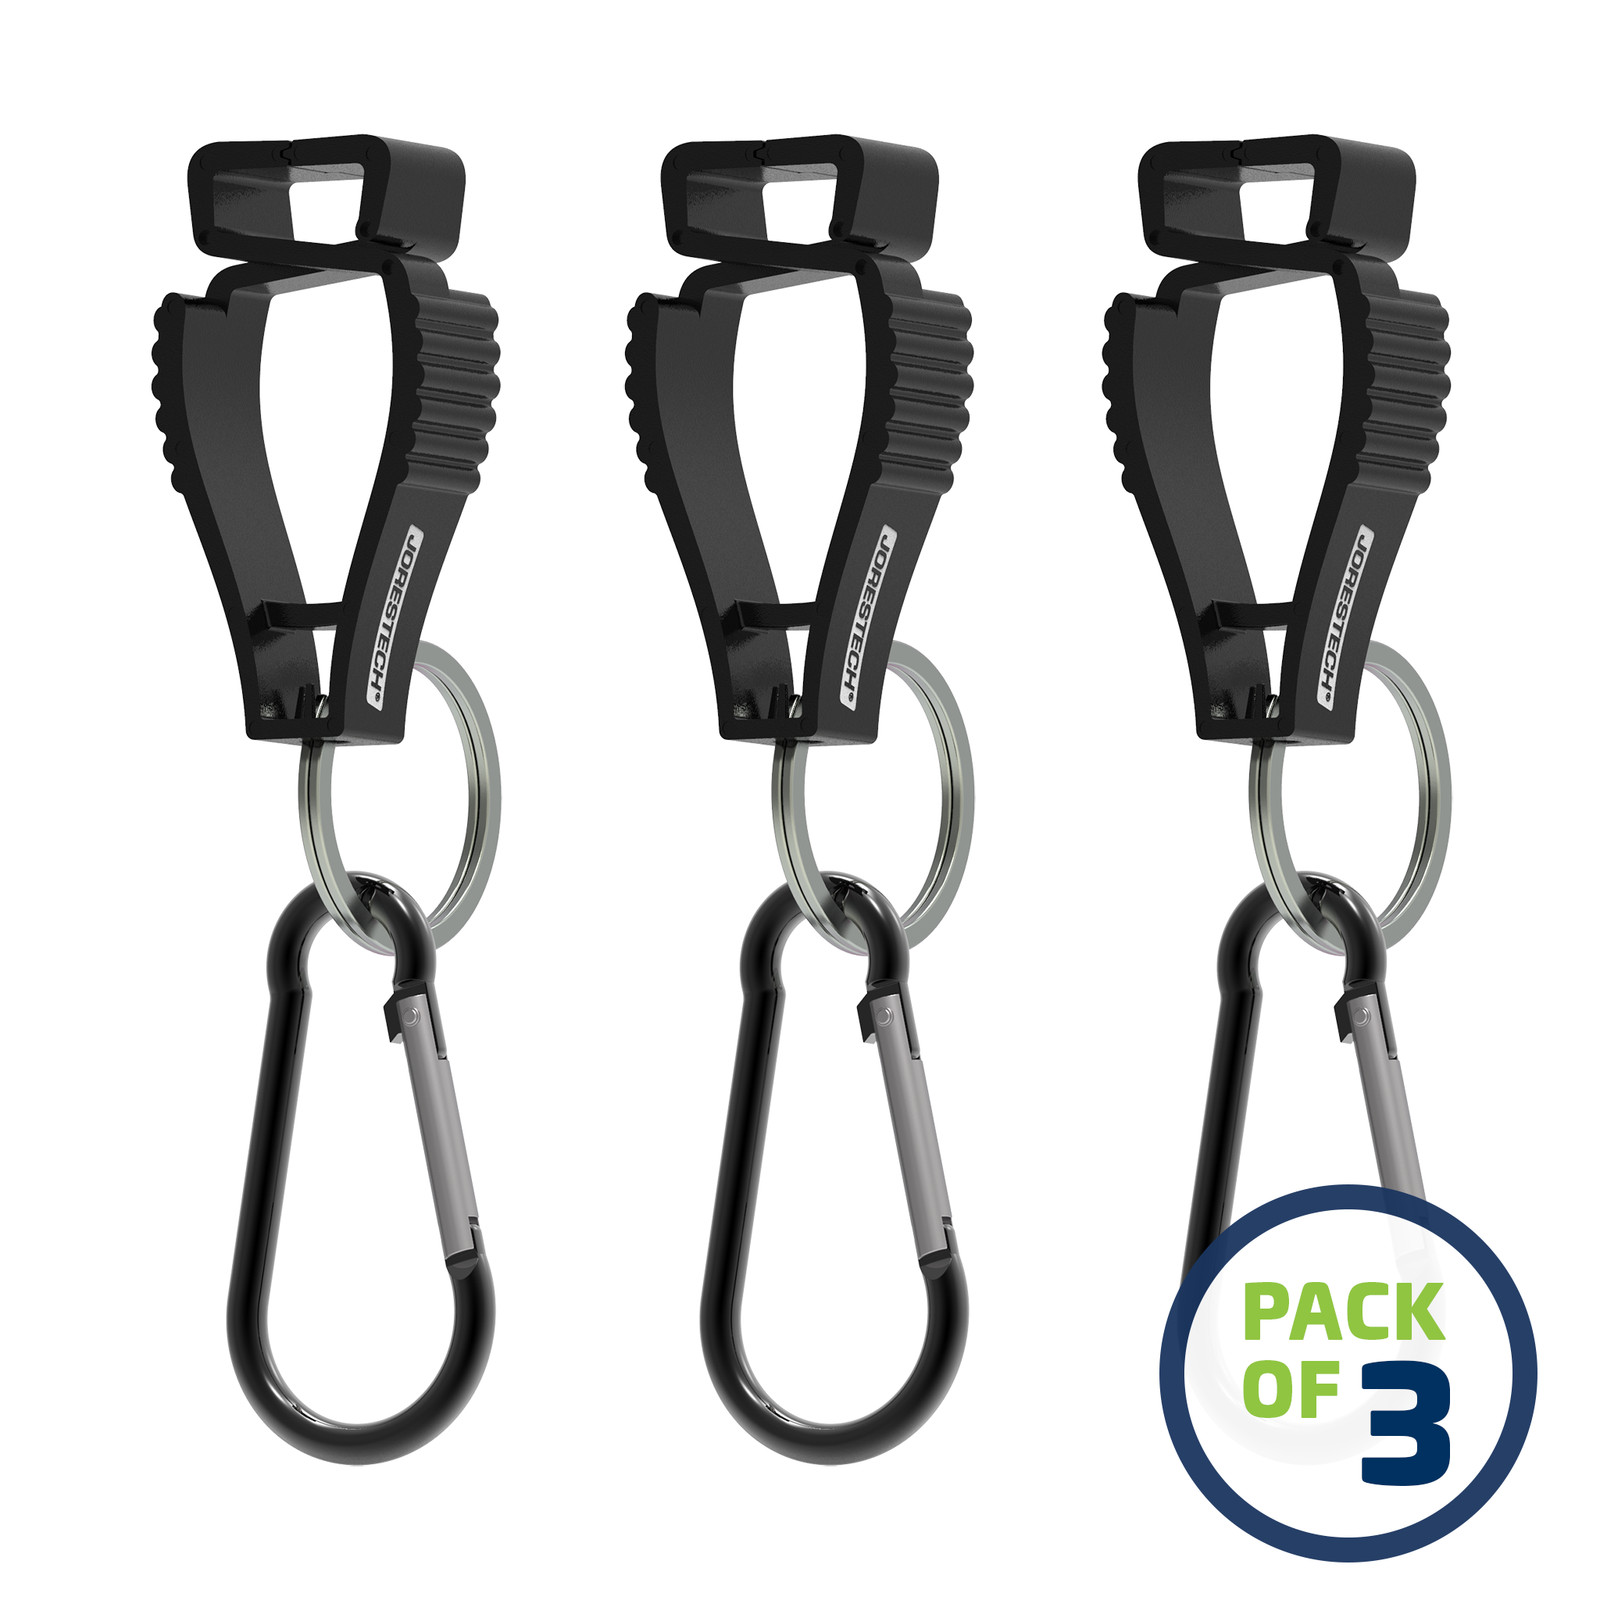 image of a pack of 3 Black JORESTECH glove clip safety holders with carabiner over white background